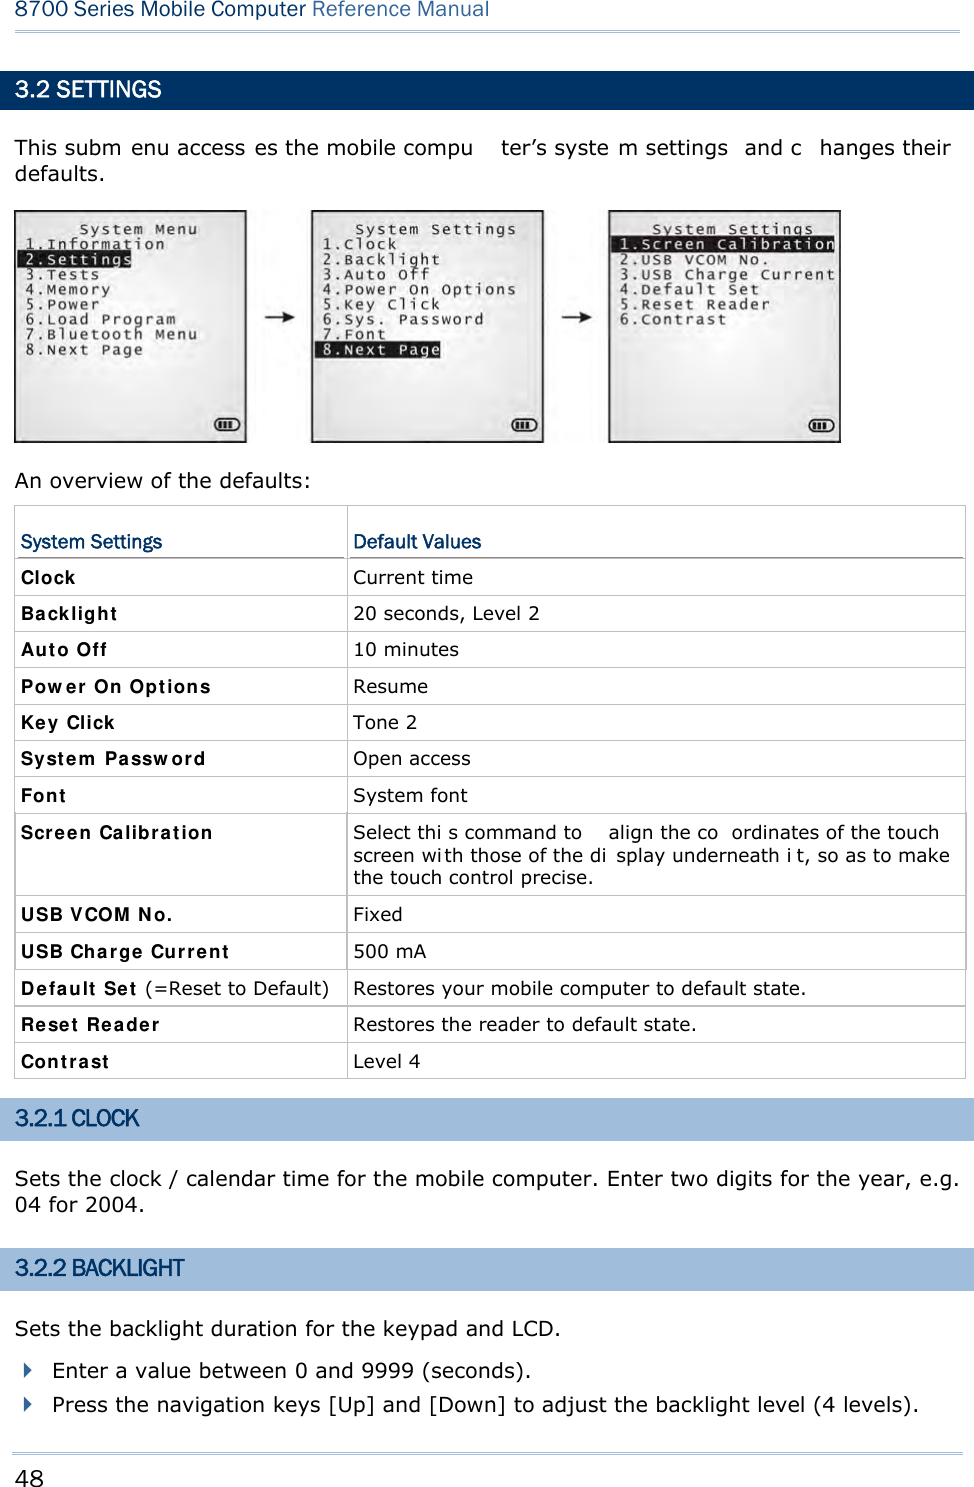 48  8700 Series Mobile Computer Reference Manual  3.2 SETTINGS This subm enu access es the mobile compu ter’s syste m settings  and c hanges their defaults.  An overview of the defaults: System Settings  Default Values Clock   Current time Backlight   20 seconds, Level 2 Aut o Off  10 minutes Pow er On Opt ions  Resume Key Click   Tone 2 Syst e m  Pa ssw ord  Open access Font   System font Scre e n Ca libr a t ion  Select thi s command to  align the co ordinates of the touch screen wi th those of the di splay underneath i t, so as to make the touch control precise. USB VCOM  N o.  Fixed USB Cha rge Cu r rent  500 mA Defa ult  Set  (=Reset to Default) Restores your mobile computer to default state. Re set  Re a der  Restores the reader to default state. Cont rast   Level 4 3.2.1 CLOCK Sets the clock / calendar time for the mobile computer. Enter two digits for the year, e.g. 04 for 2004. 3.2.2 BACKLIGHT Sets the backlight duration for the keypad and LCD.  Enter a value between 0 and 9999 (seconds).  Press the navigation keys [Up] and [Down] to adjust the backlight level (4 levels).  